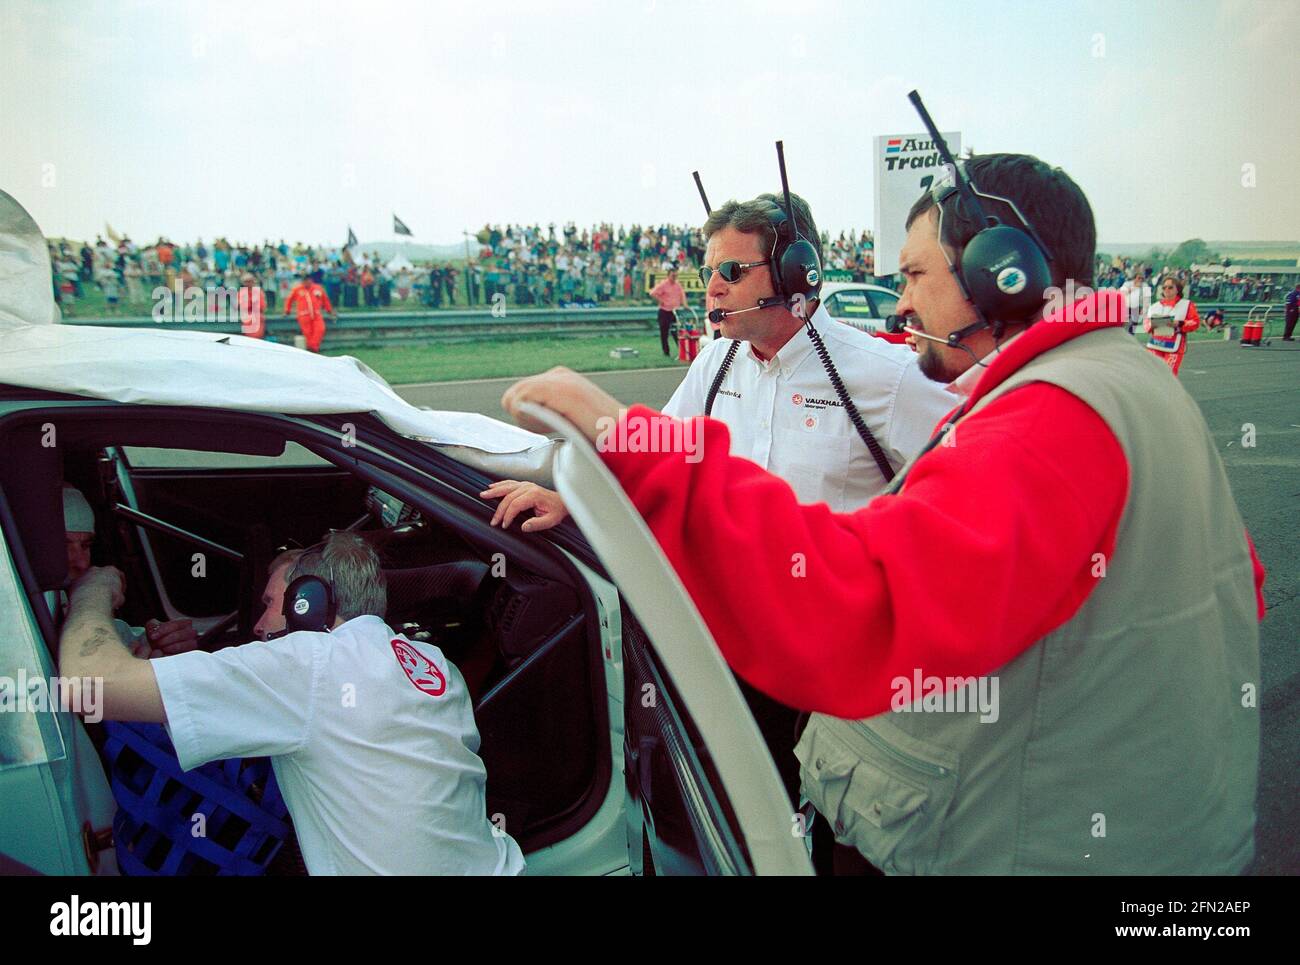 Derek Warwick overseeing Vauxhall Motorsport challenge of the British Touring Car championship of 1999 pictured on the grid at Thruxton Circuit as the cars and drivers prepare for the start of the race. Stock Photo